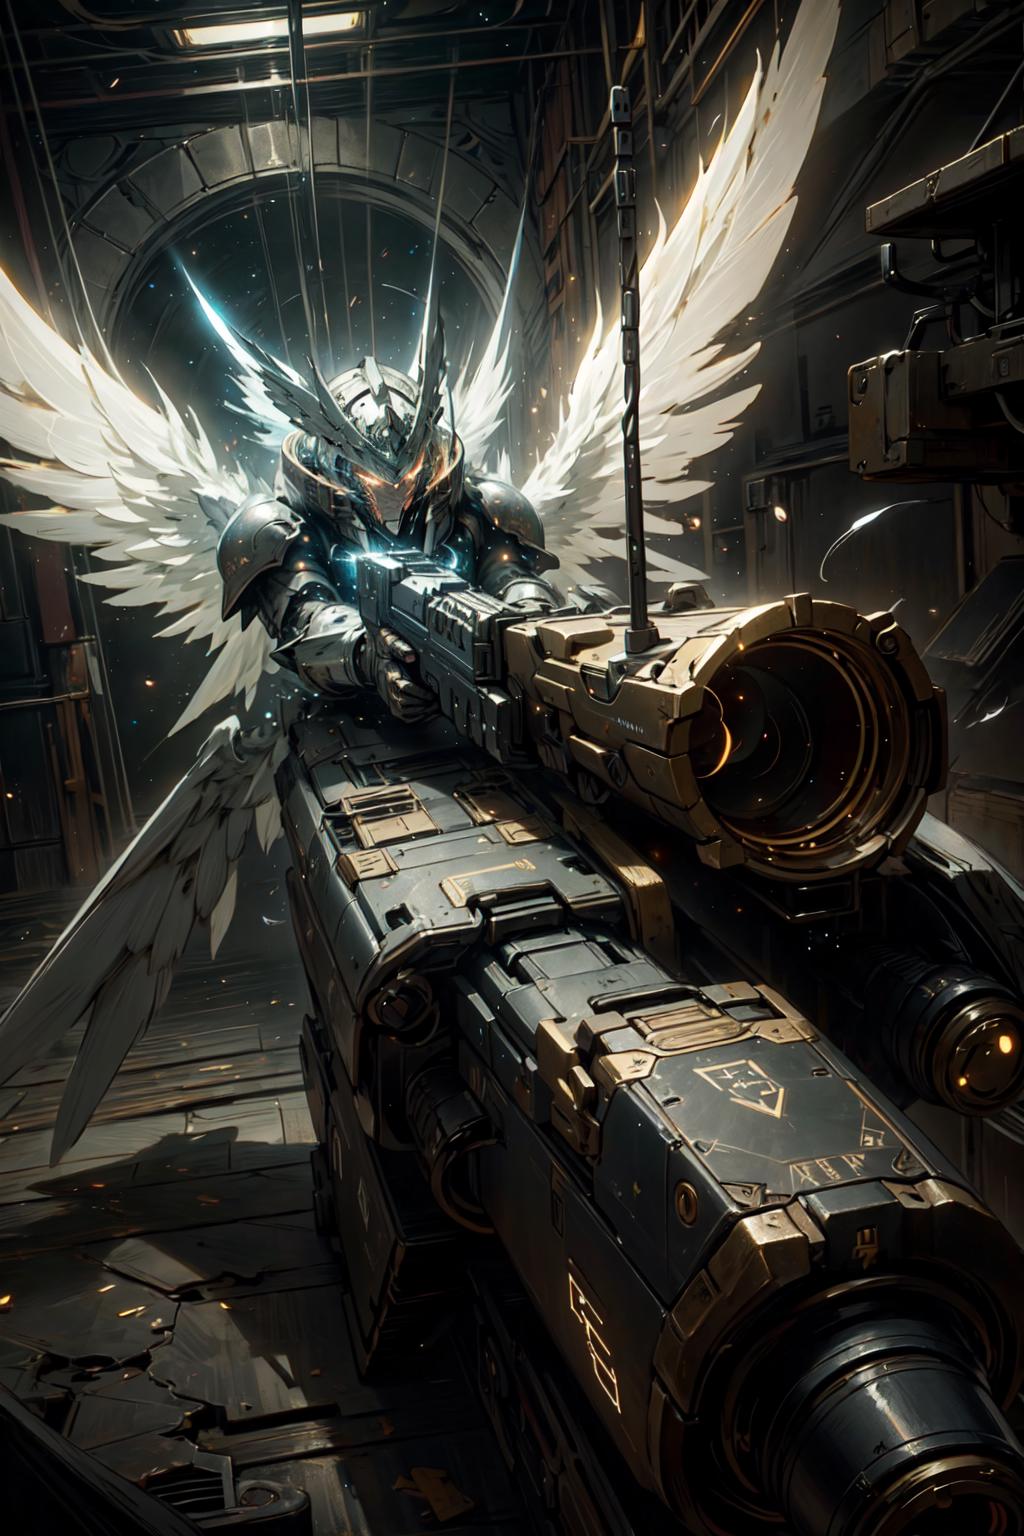 A fantasy image of a warrior angel holding a weapon over a mechanical object.